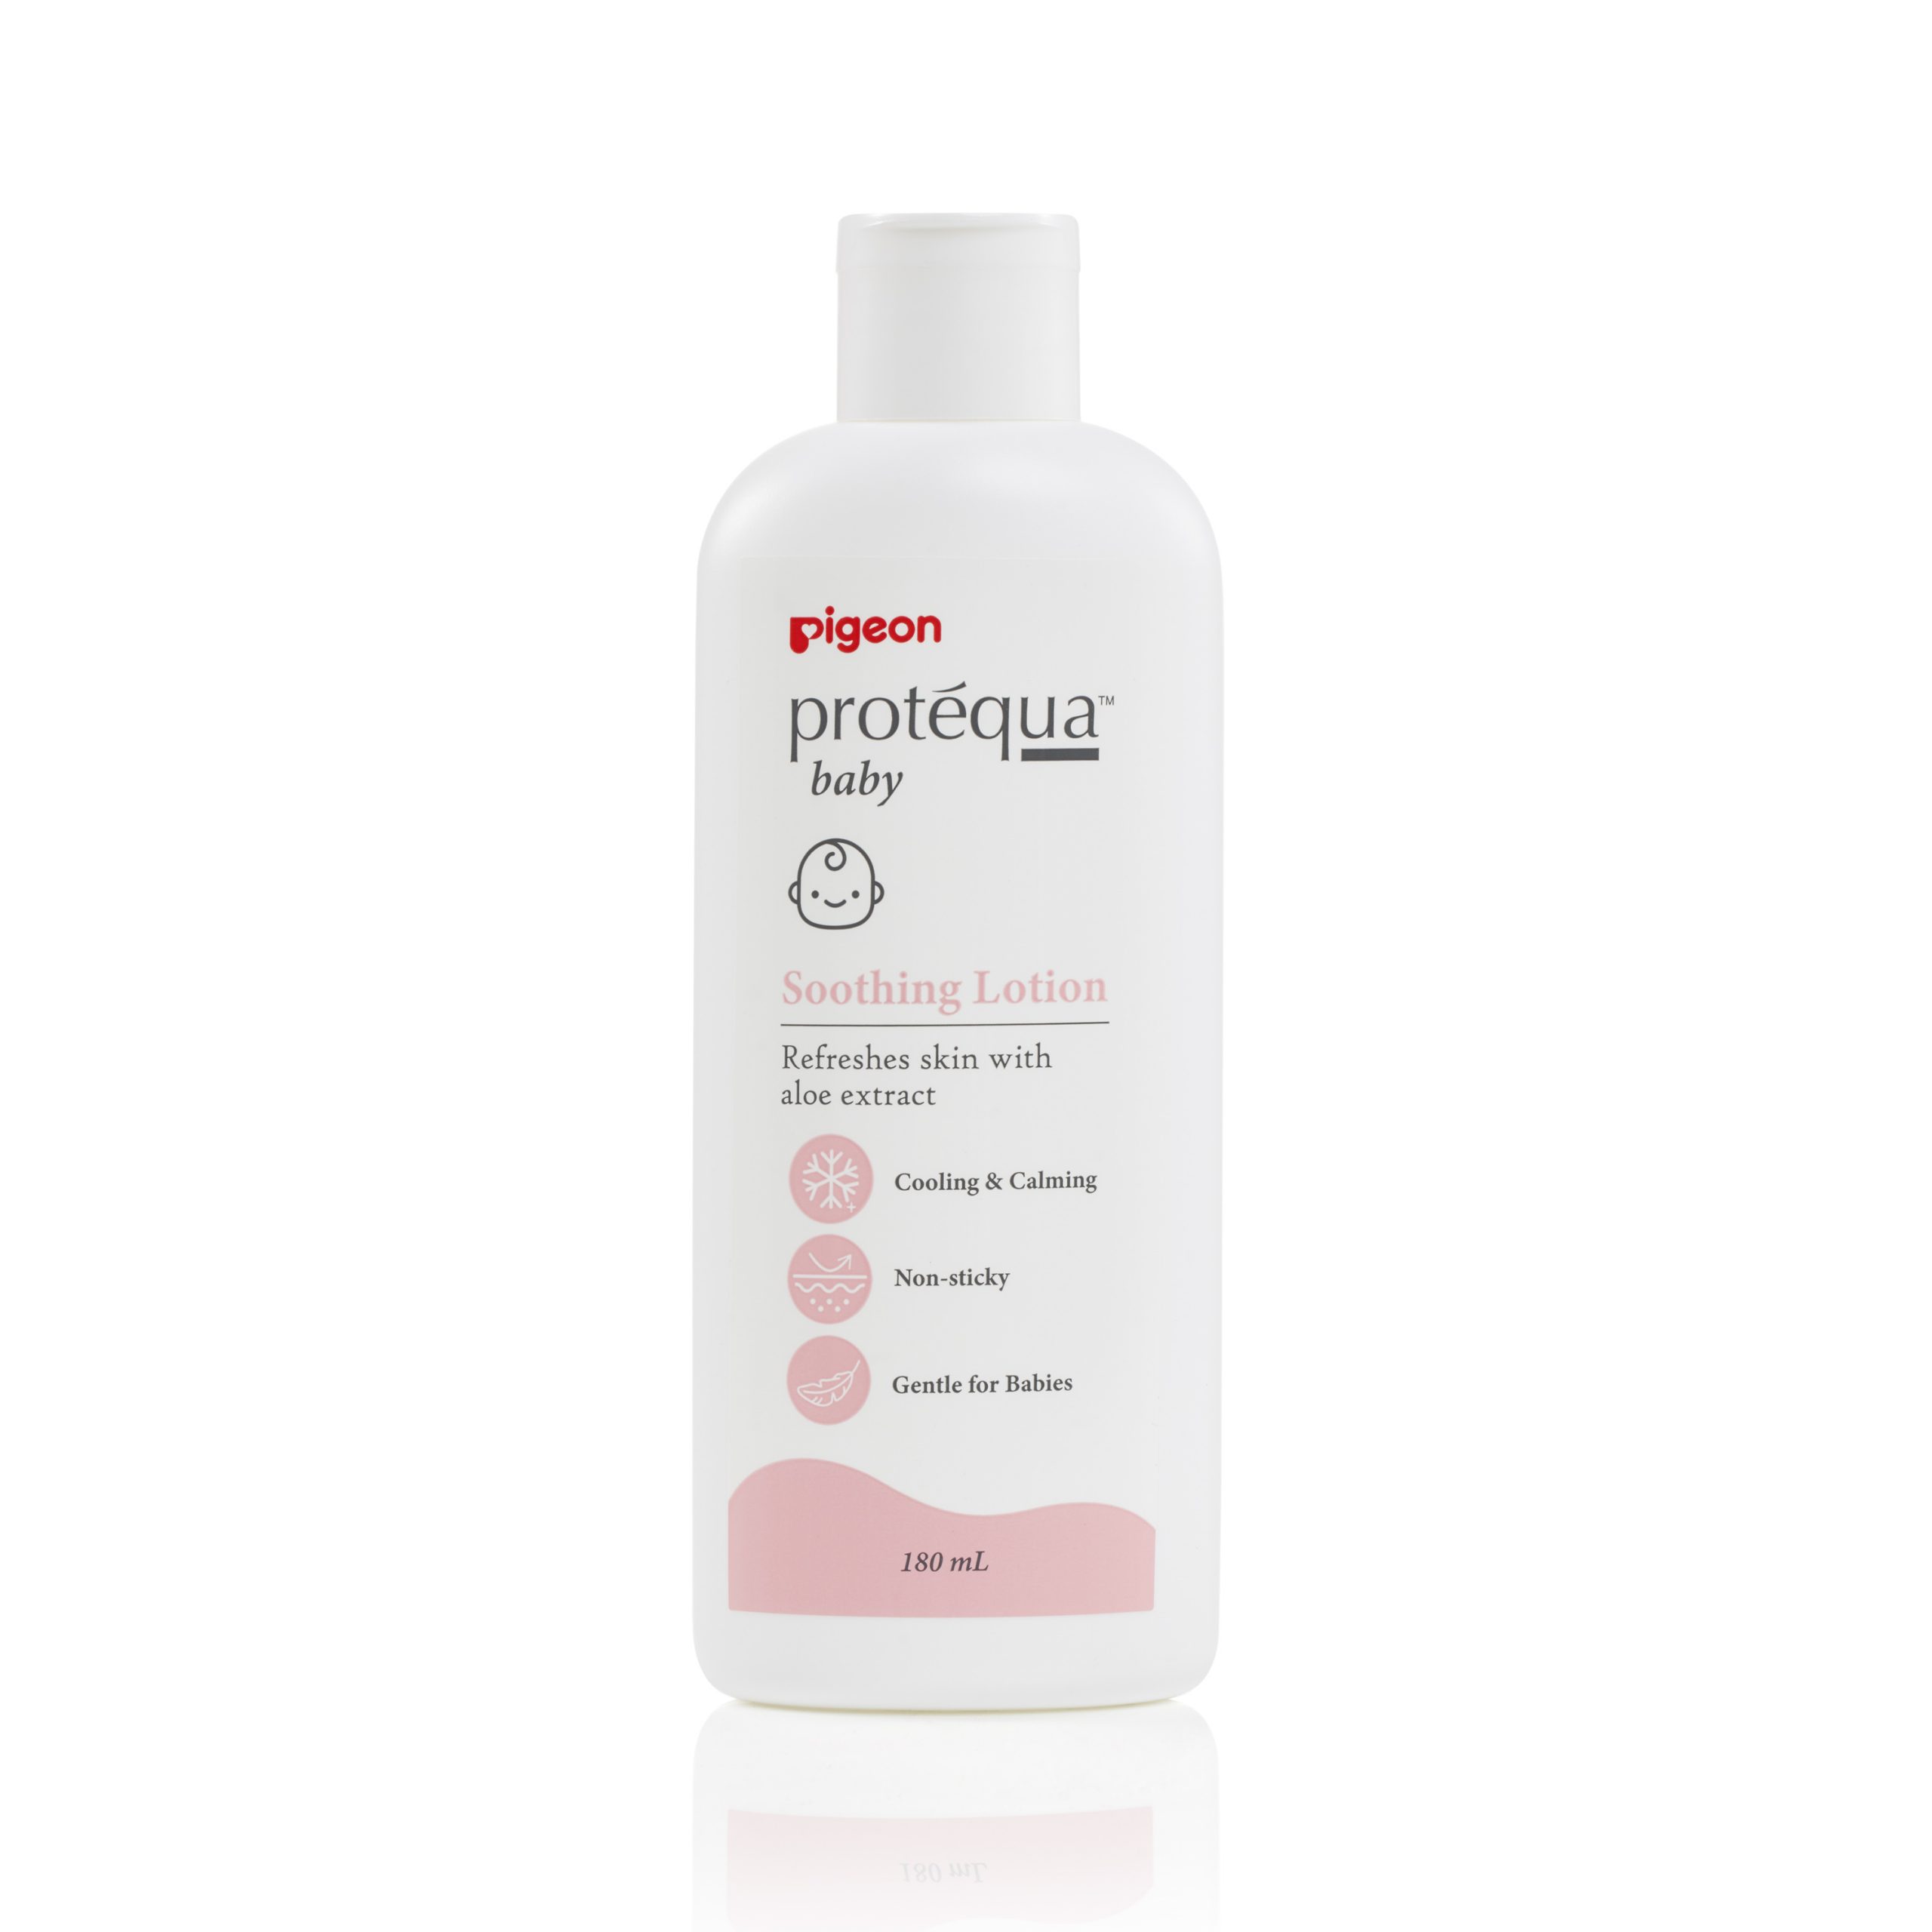 Pigeon Protequa Soothing Lotion (PG-78373-1)